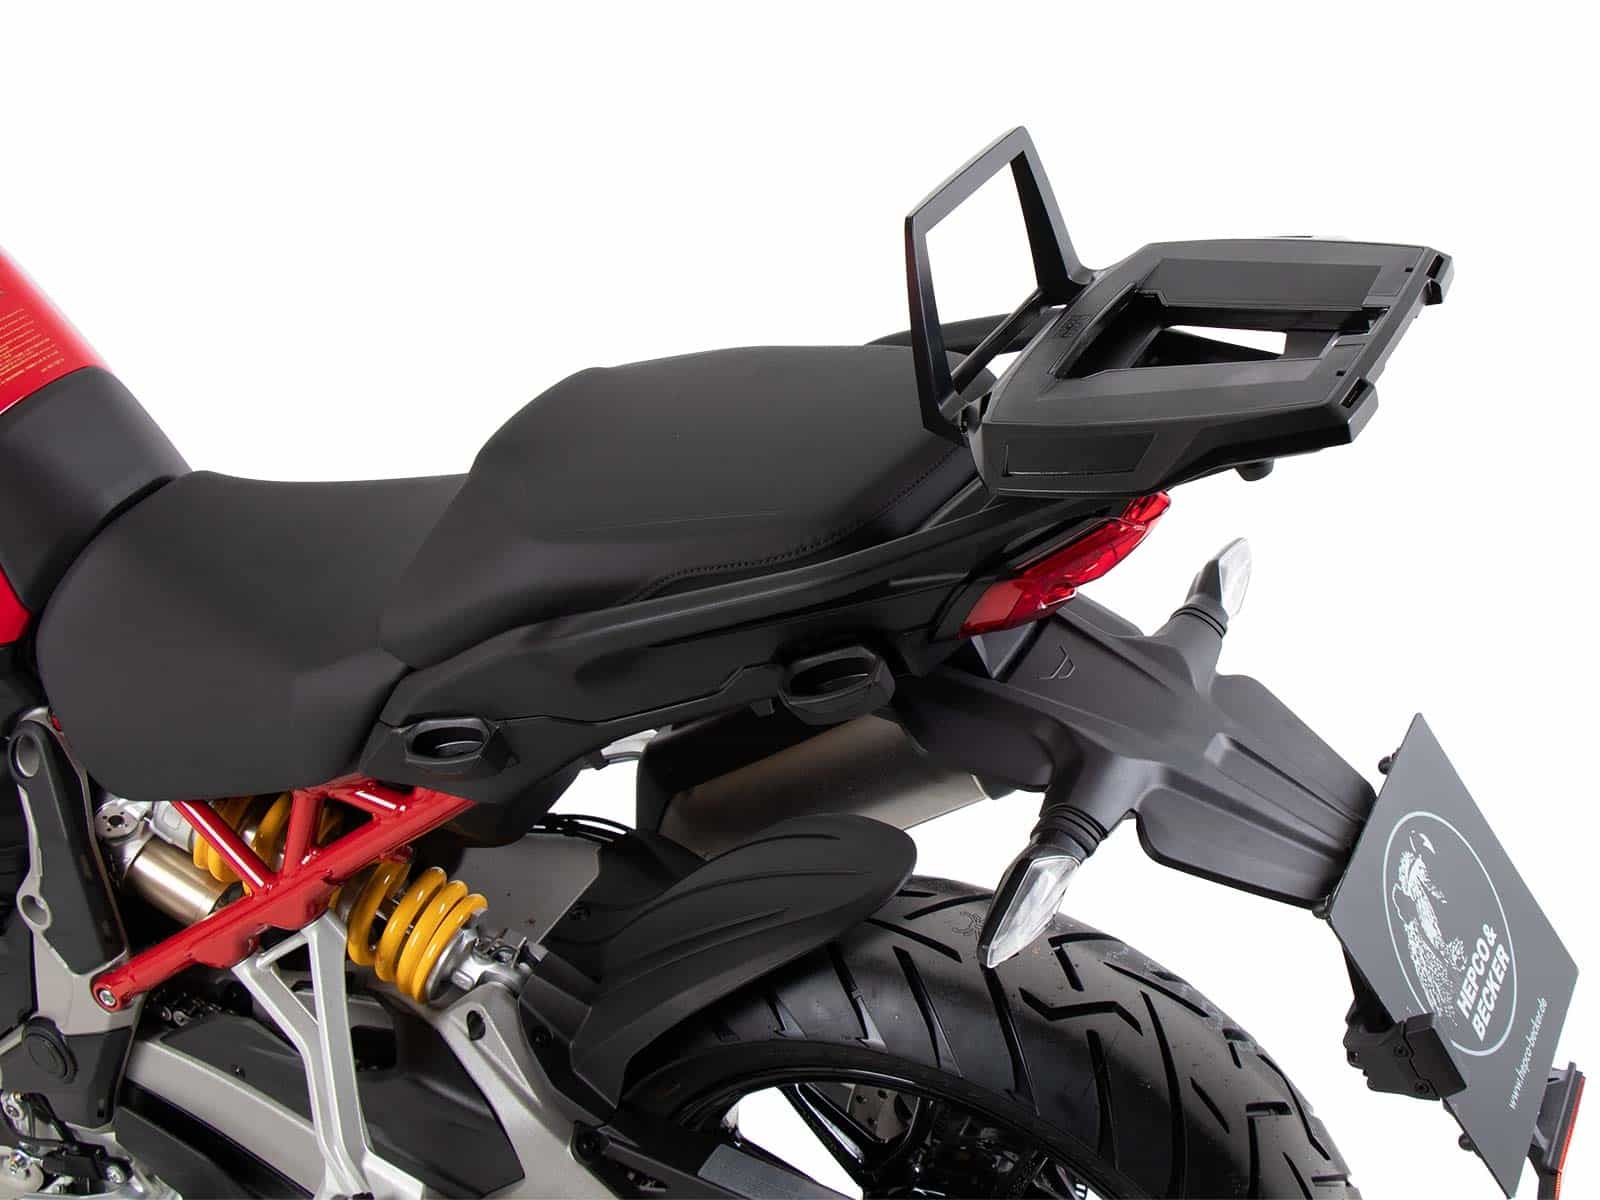 Alurack top case carrier black for combination with original rear rack for Ducati Multistrada V4/S/S Sport/Pikes Peak (2021-)/Rally(2023-)